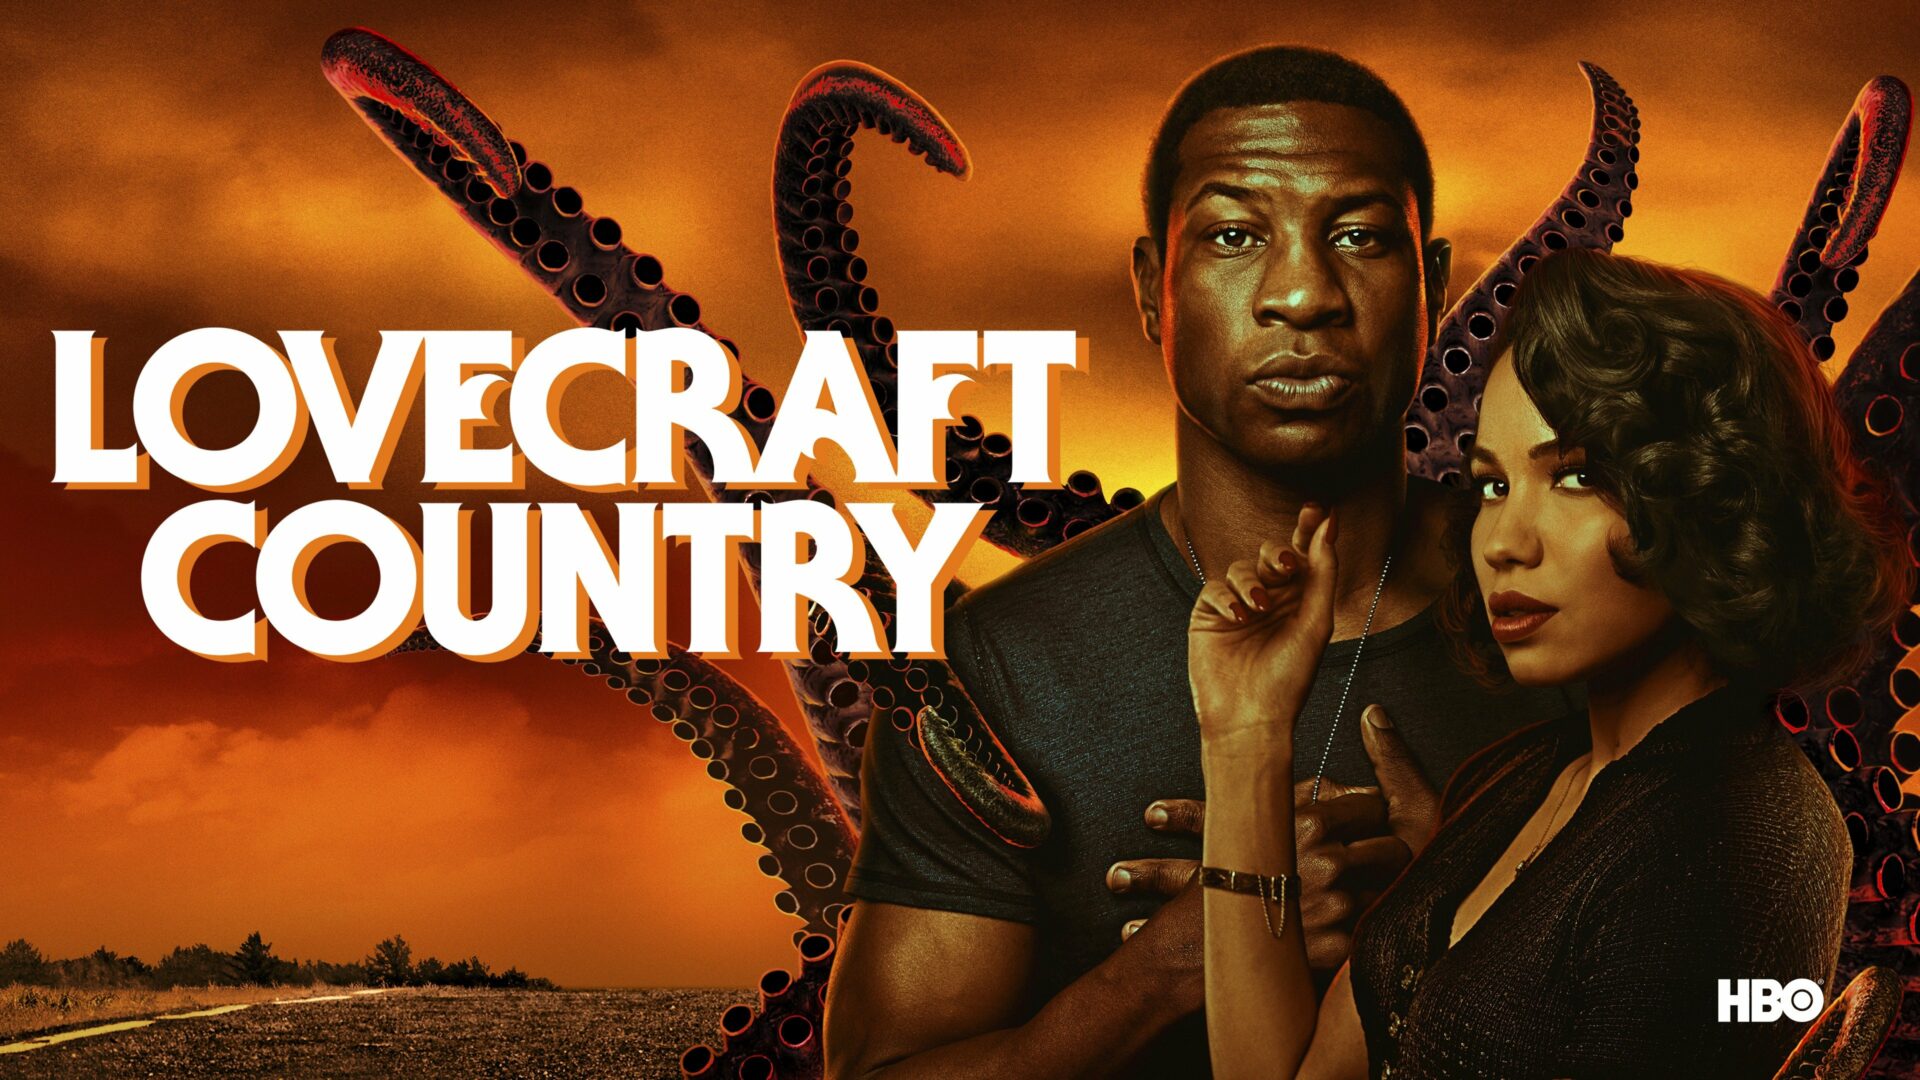 When Will We Get Lovecraft Country Season 2 Release Date?